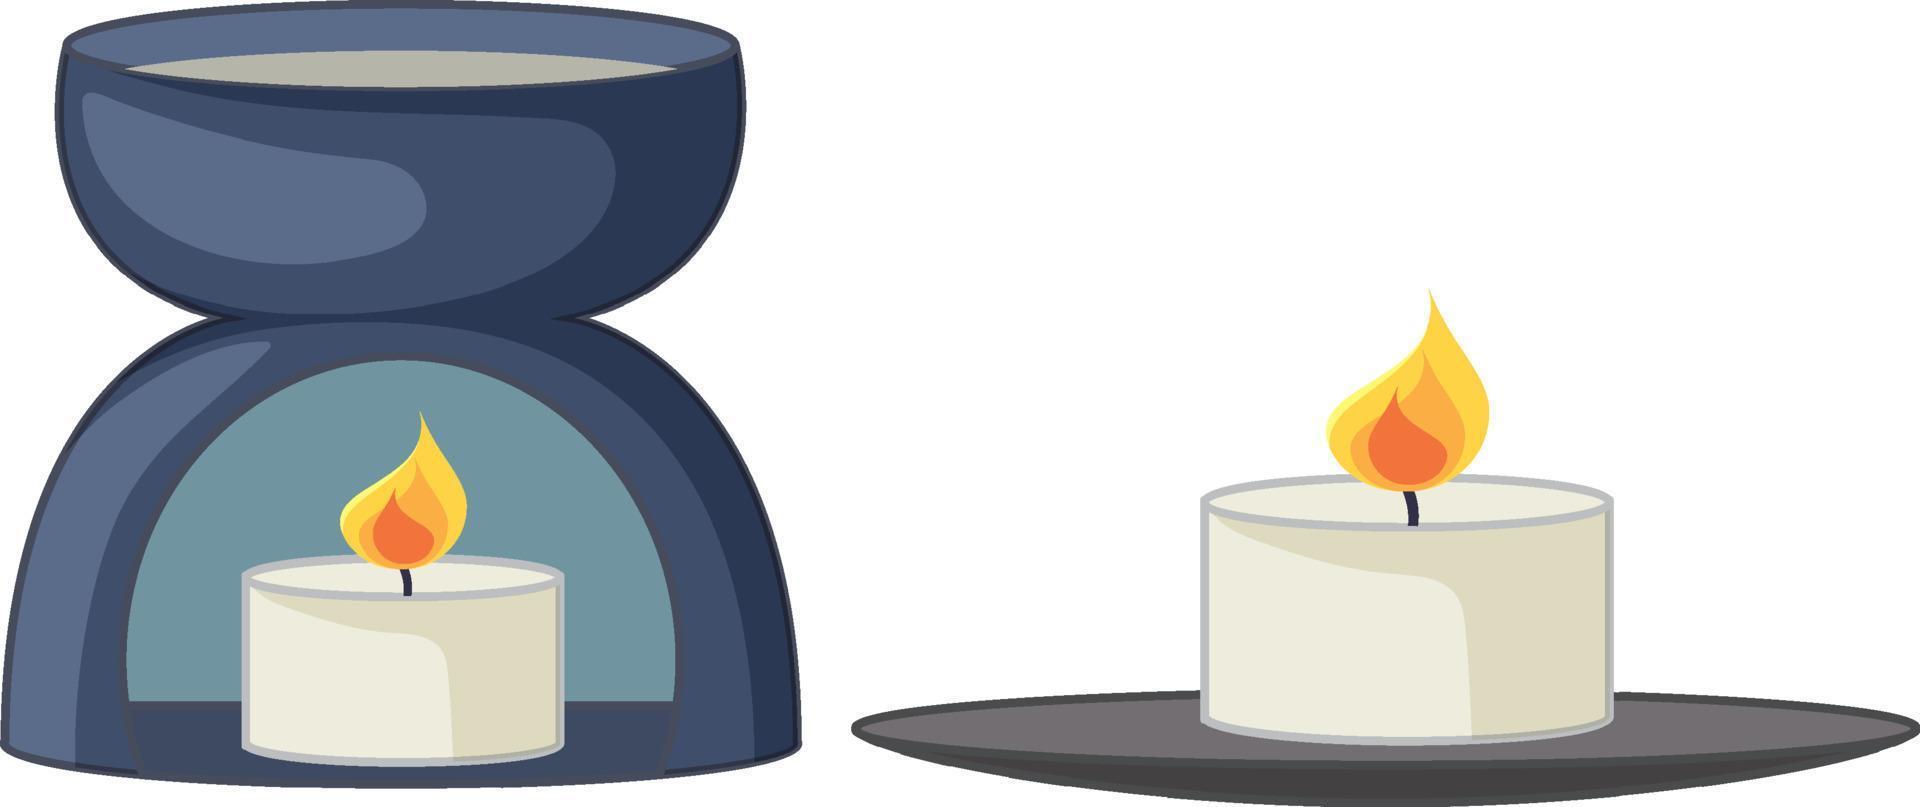 Spa candle objects isolated vector